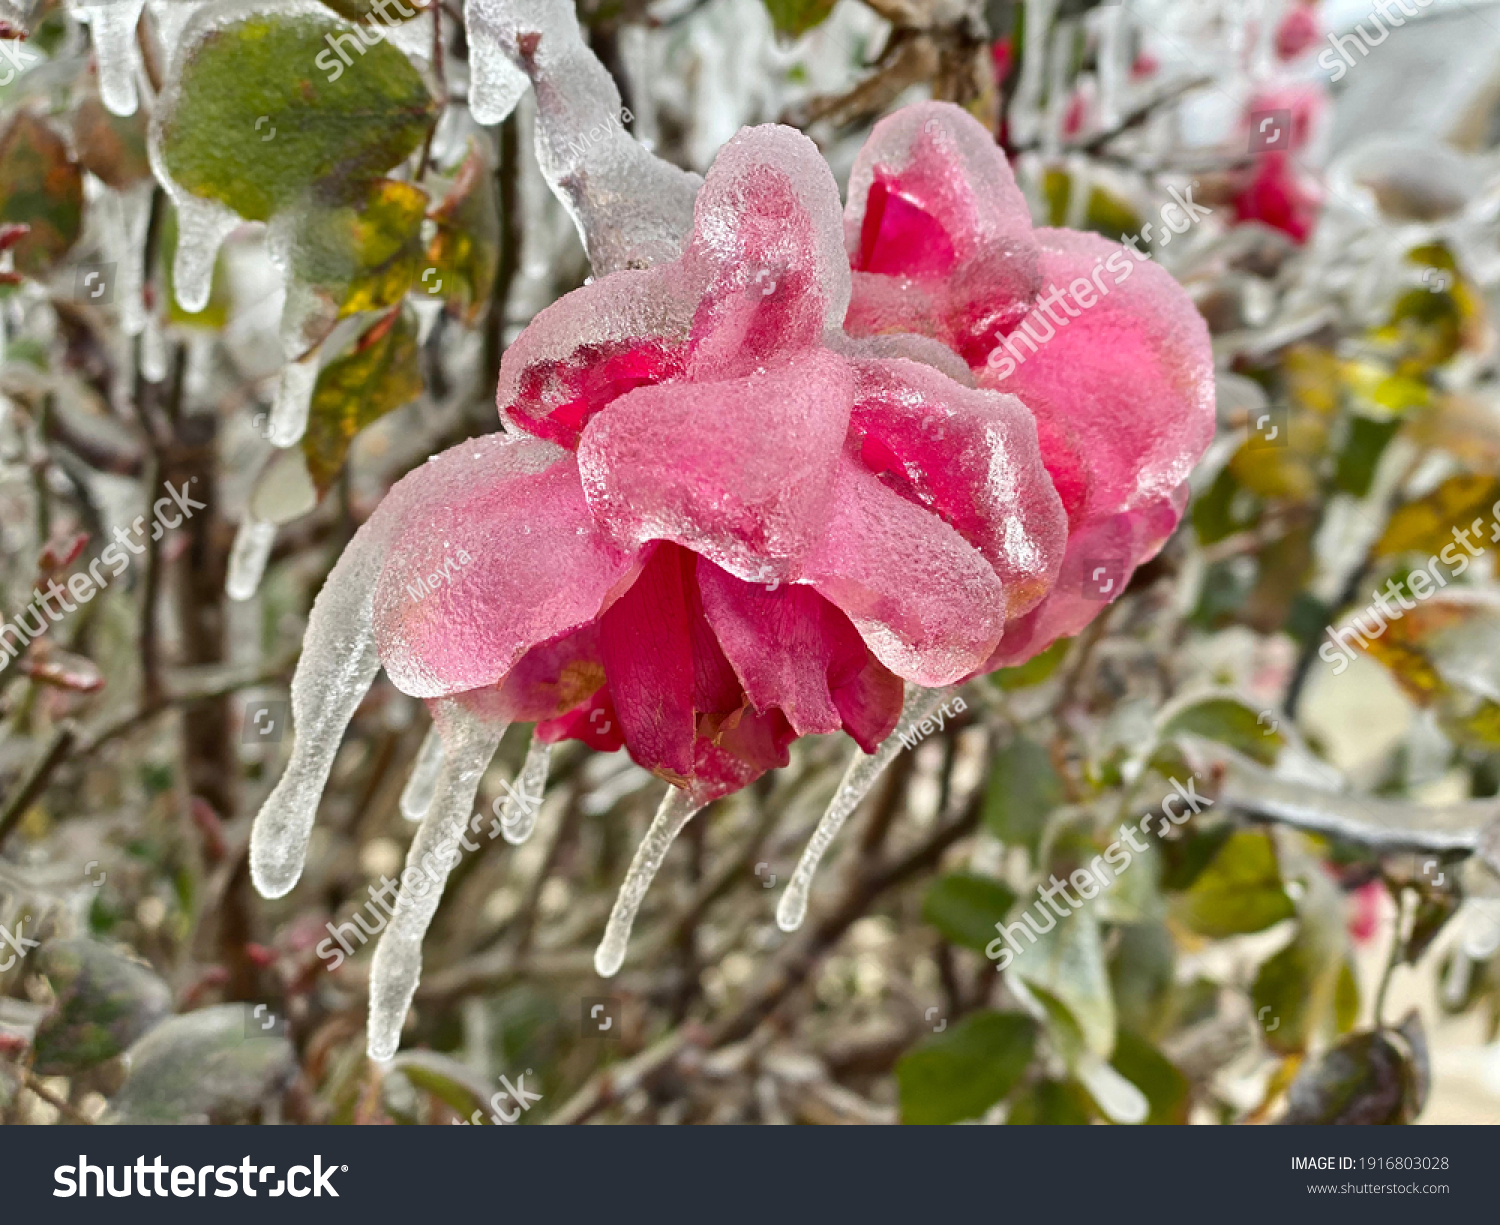 Winter storm in Austin Texas. A red rose is covered with ice. Freezing rain.  Winter scene. Anomaly weather. Frozen roses. Natural disaster #1916803028